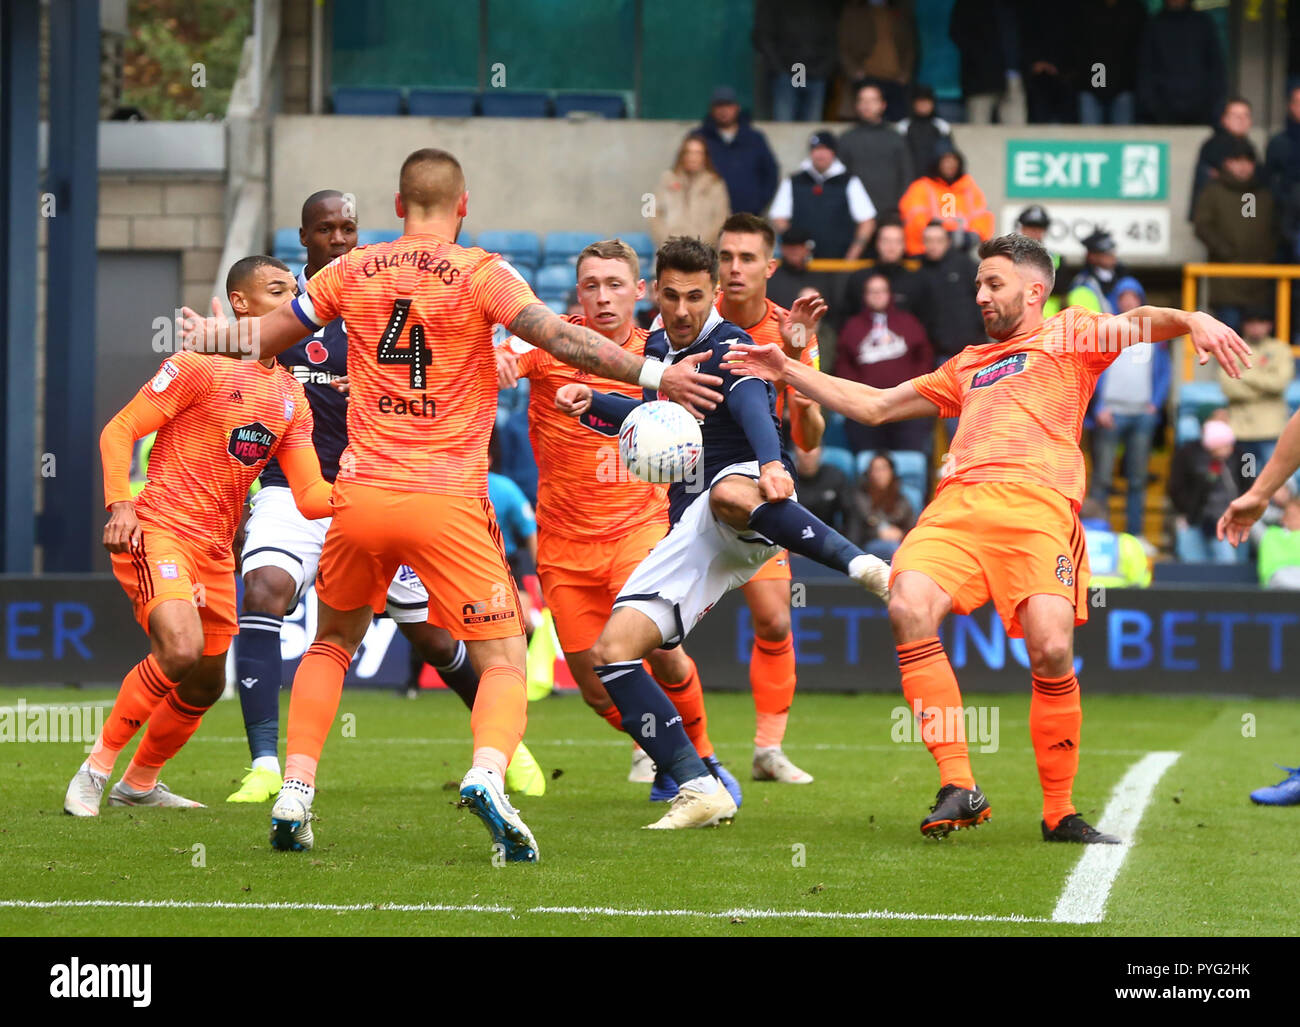 London, UK. 27 October, 2018 Lee Gregory of Millwall scores during Sky Bet Championship match between Millwall and Ipswich Town at The Den Ground, London. Credit Action Foto Sport   FA Premier League and Football League images are subject to DataCo Licence EDITORIAL USE ONLY No use with unauthorised audio, video, data, fixture lists (outside the EU), club/league logos or 'live' services. Online in-match use limited to 45 images (+15 in extra time). No use to emulate moving images. Credit: Action Foto Sport/Alamy Live News Stock Photo